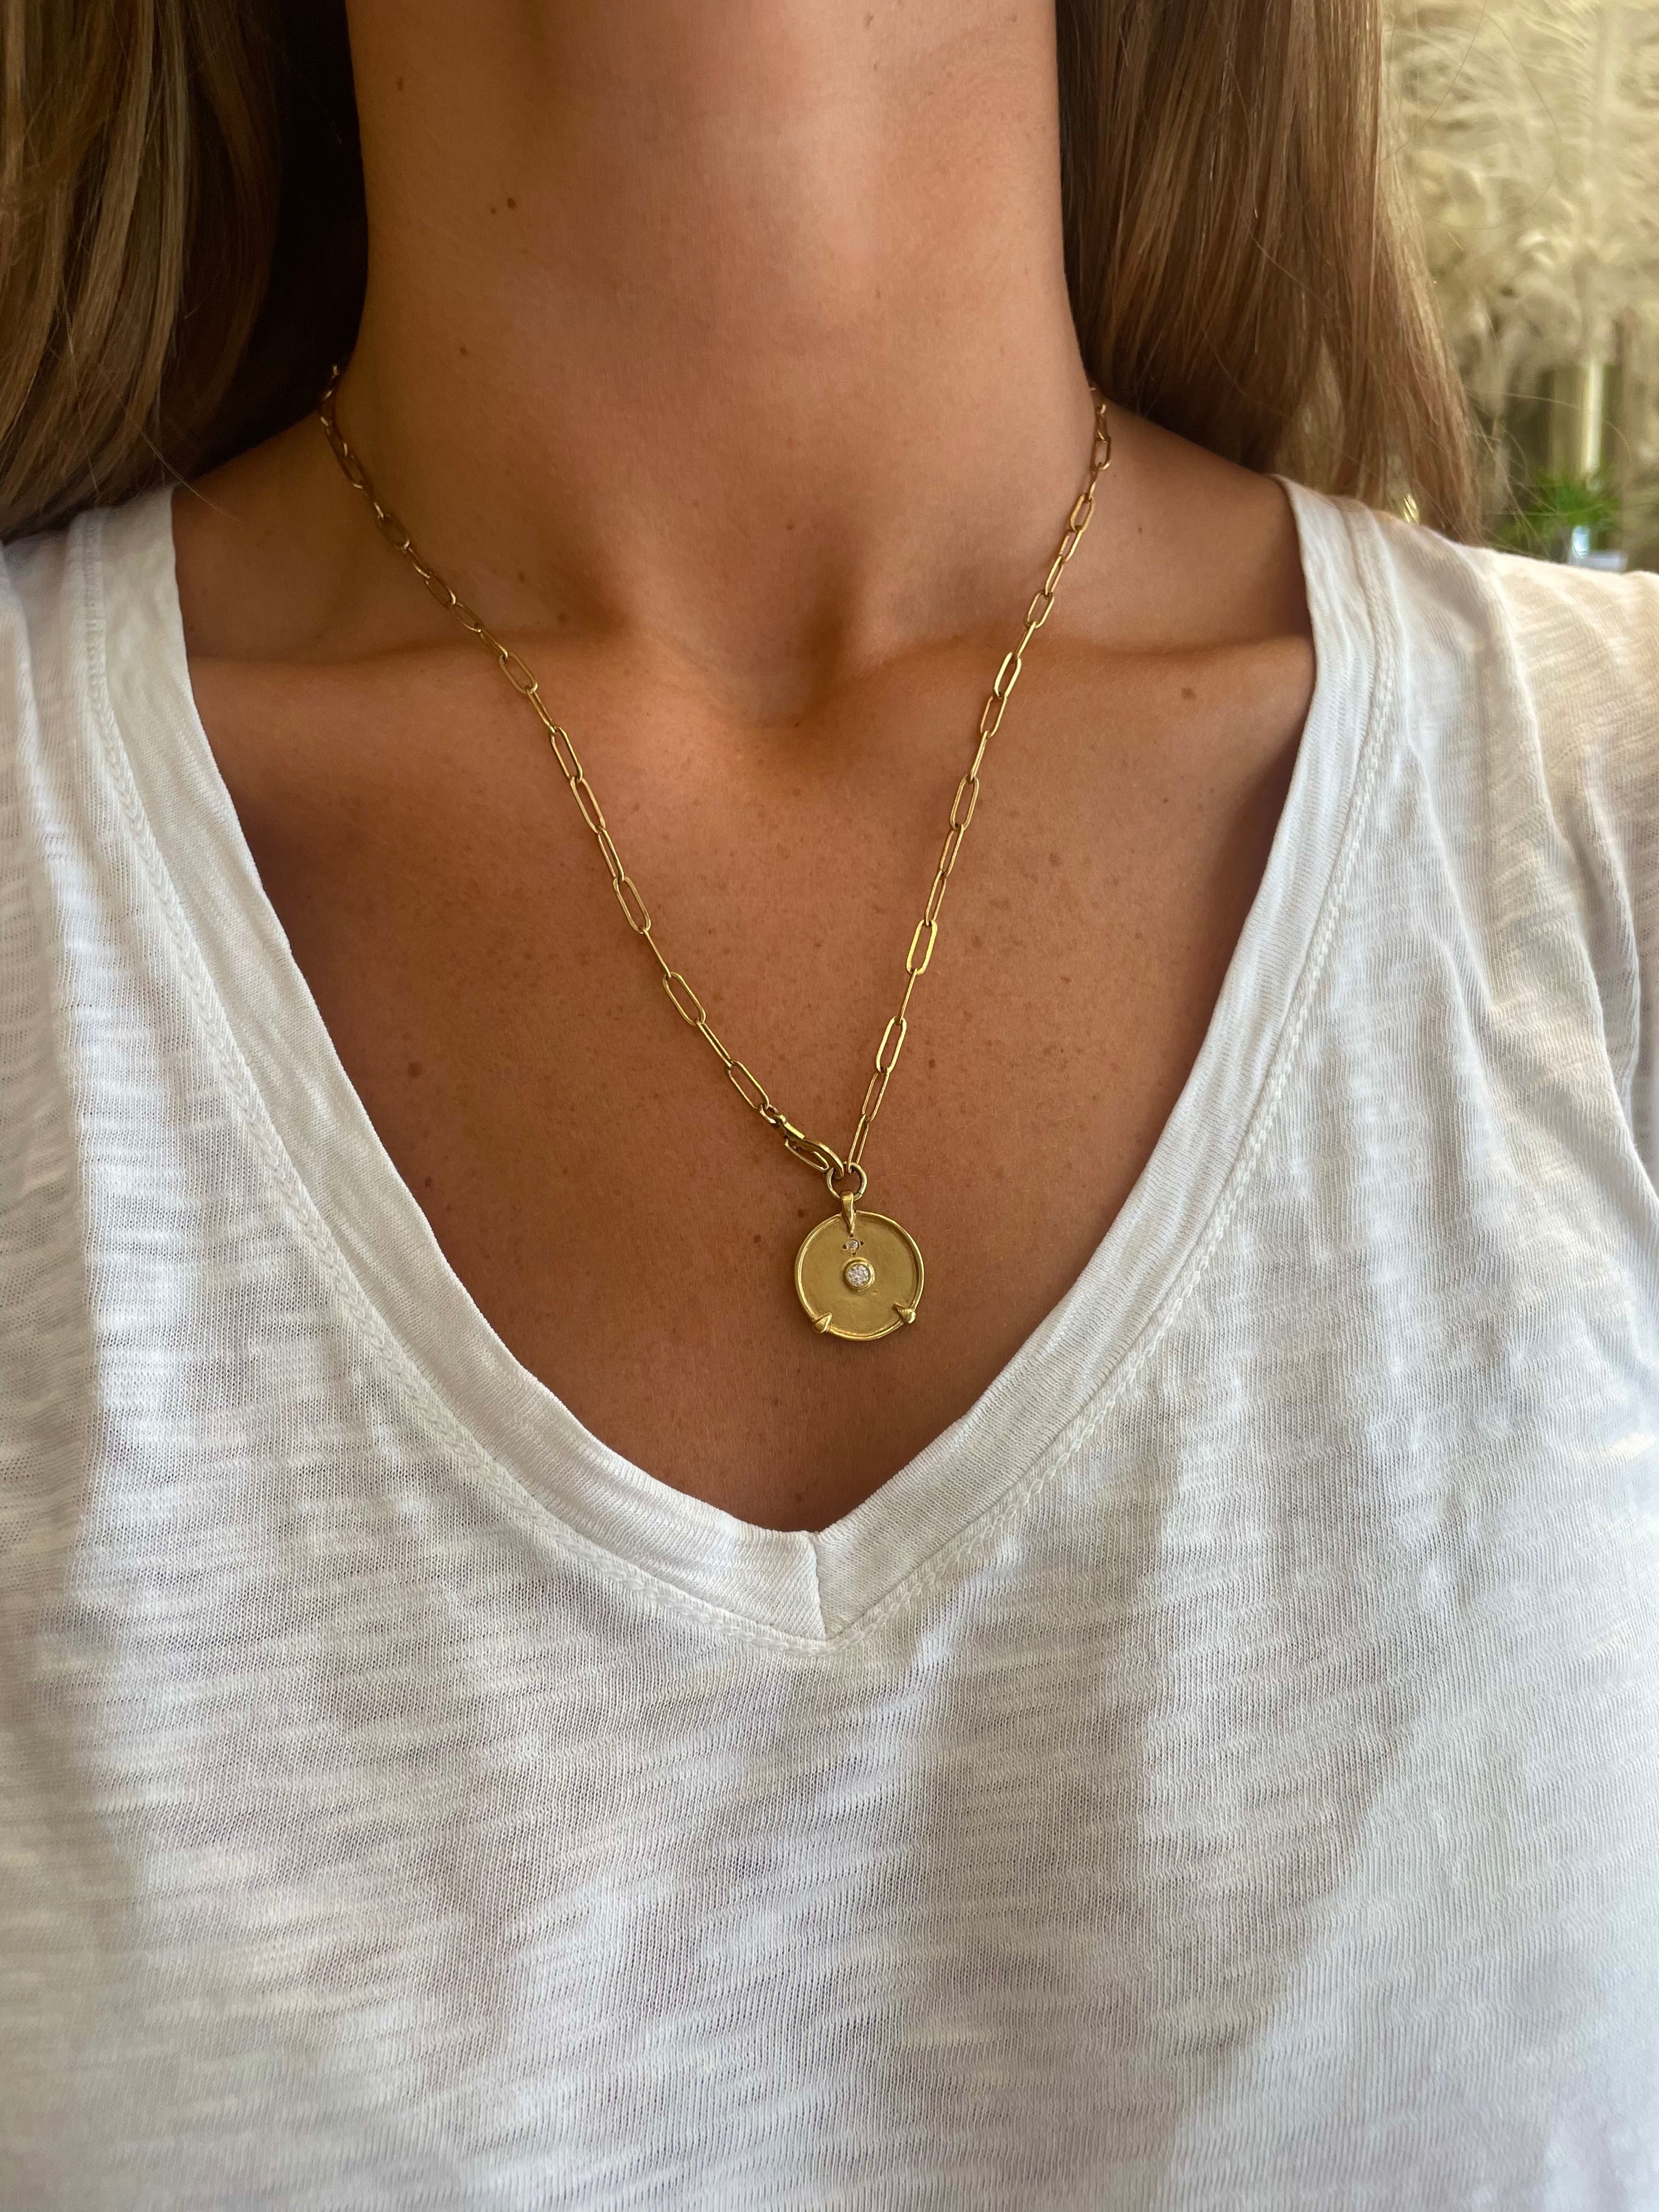 gold plated link chain necklace with gold pendant by hanka in